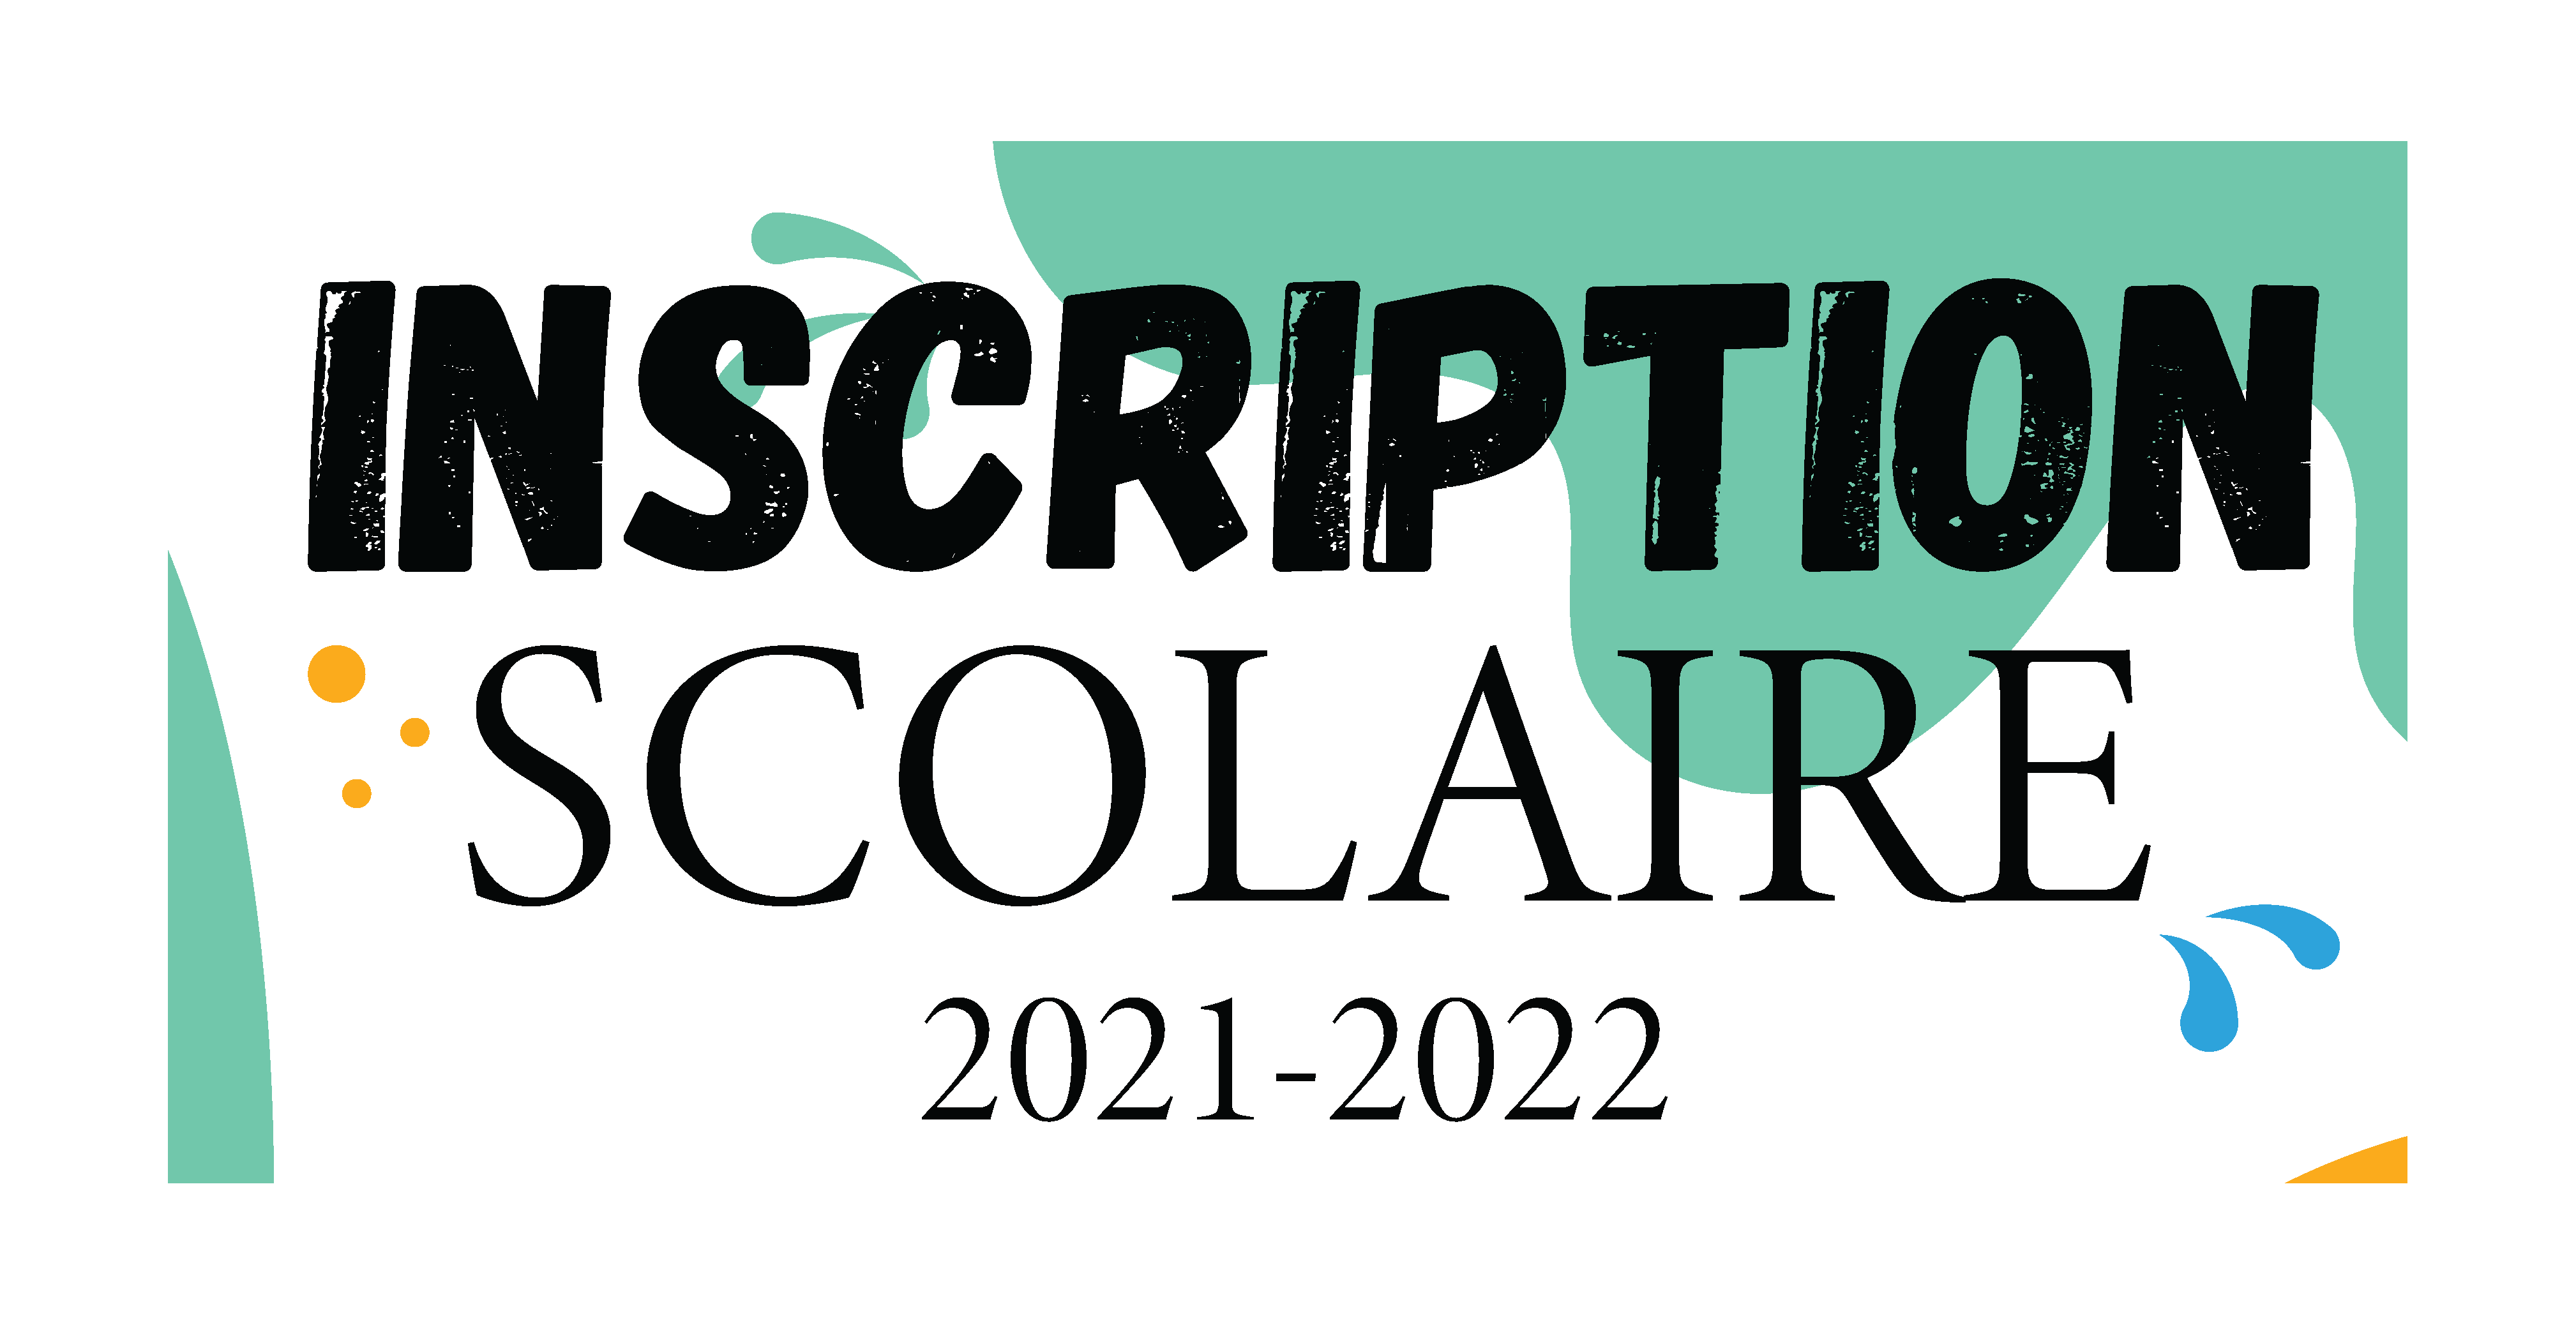 inscriptions-scolaire-2021vf.png